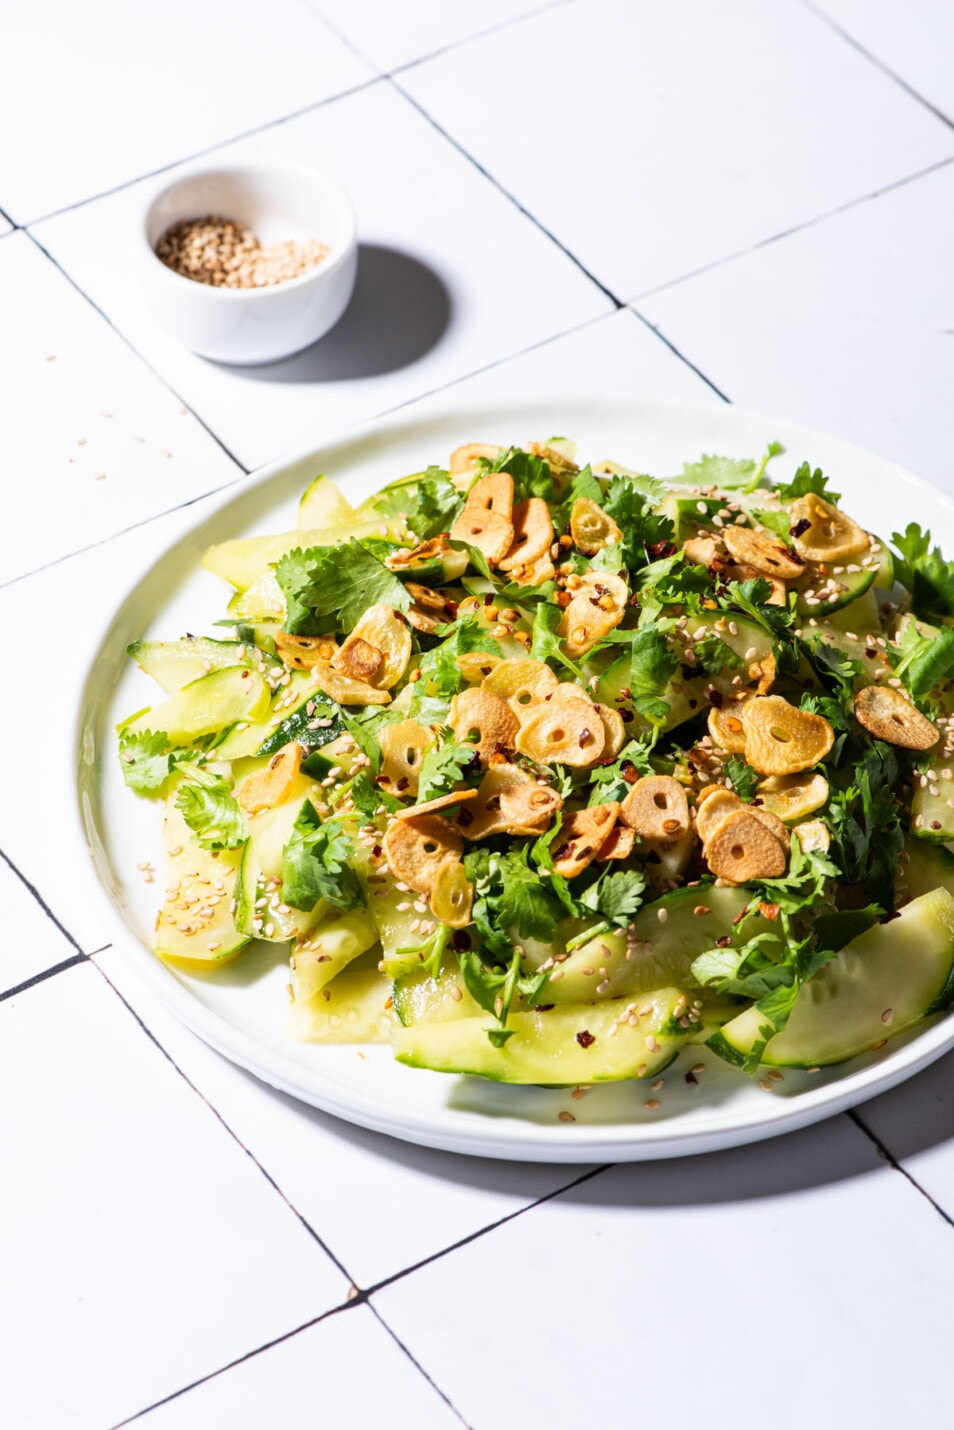 Healthy summer salad made of cucumbers, garlic chips, and cilantro, on a white plate.